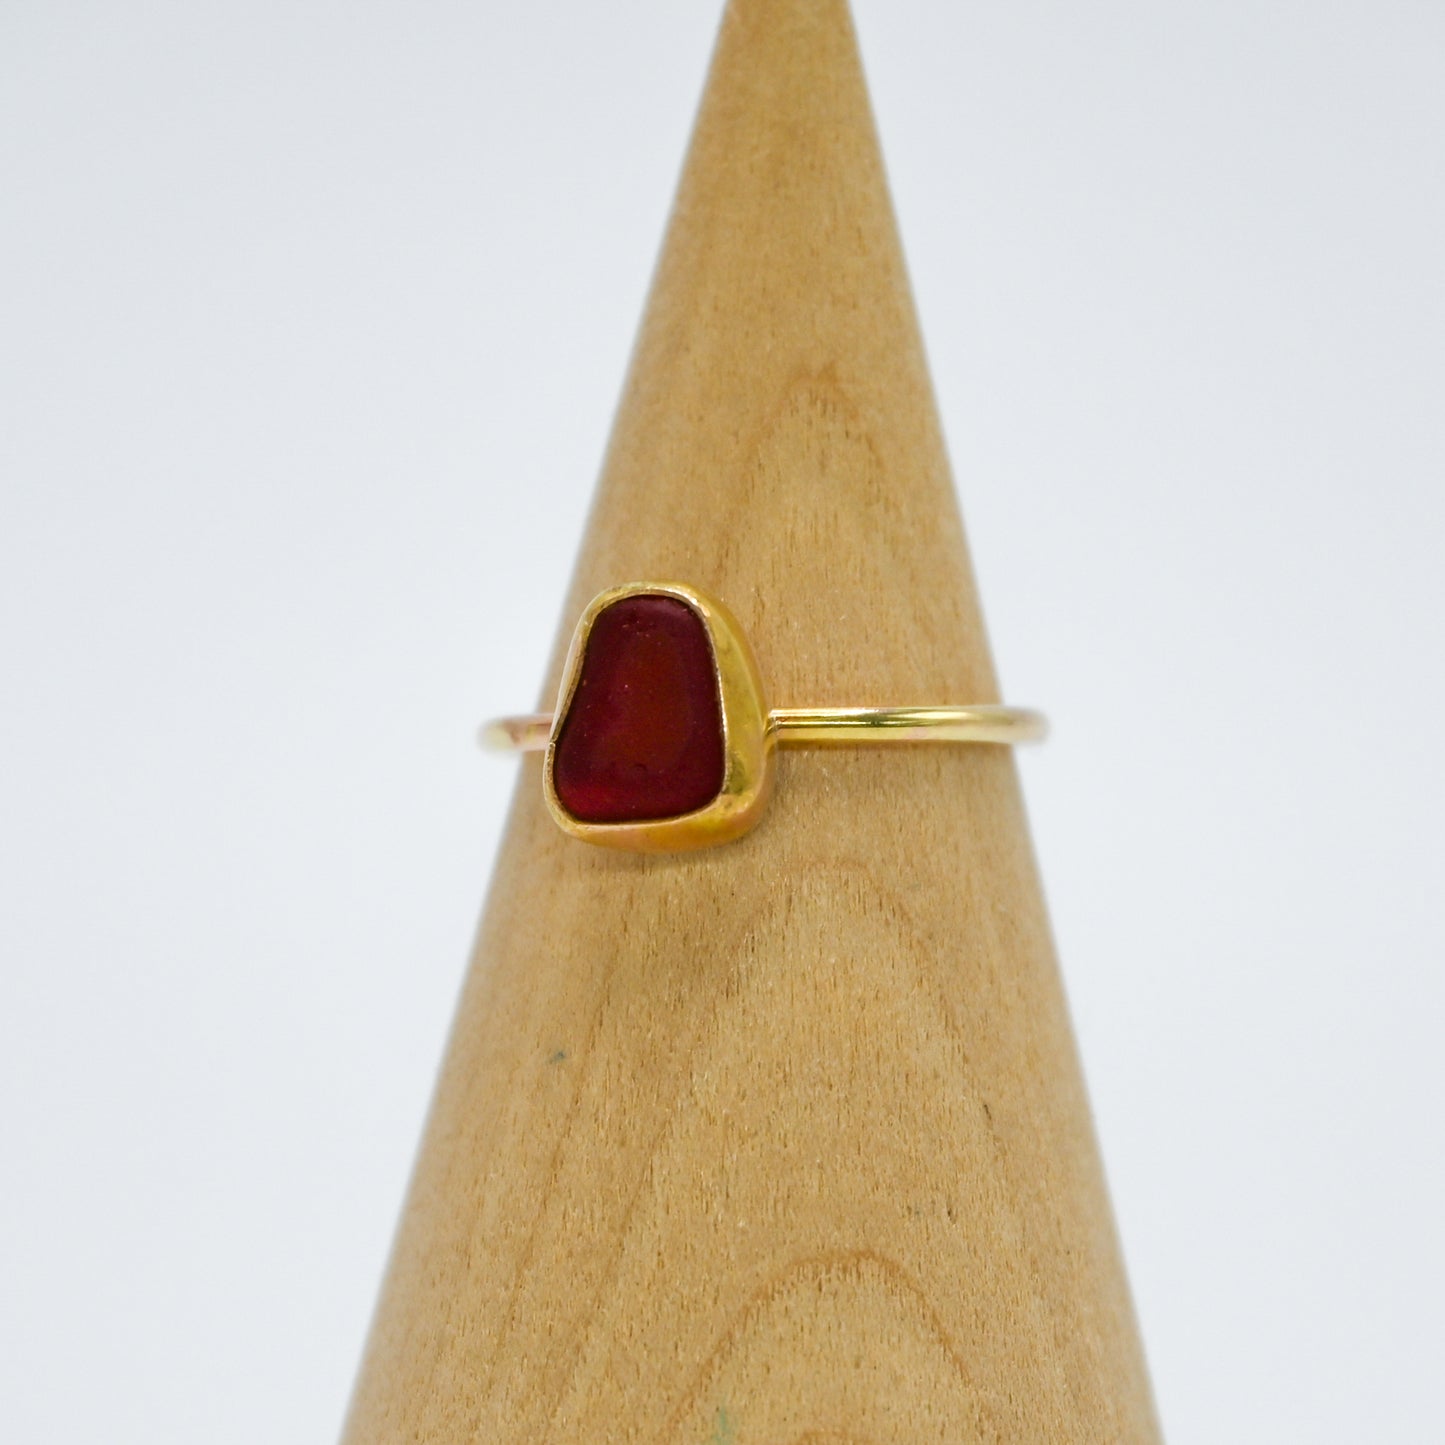 14K solid gold red sea glass size 6.5